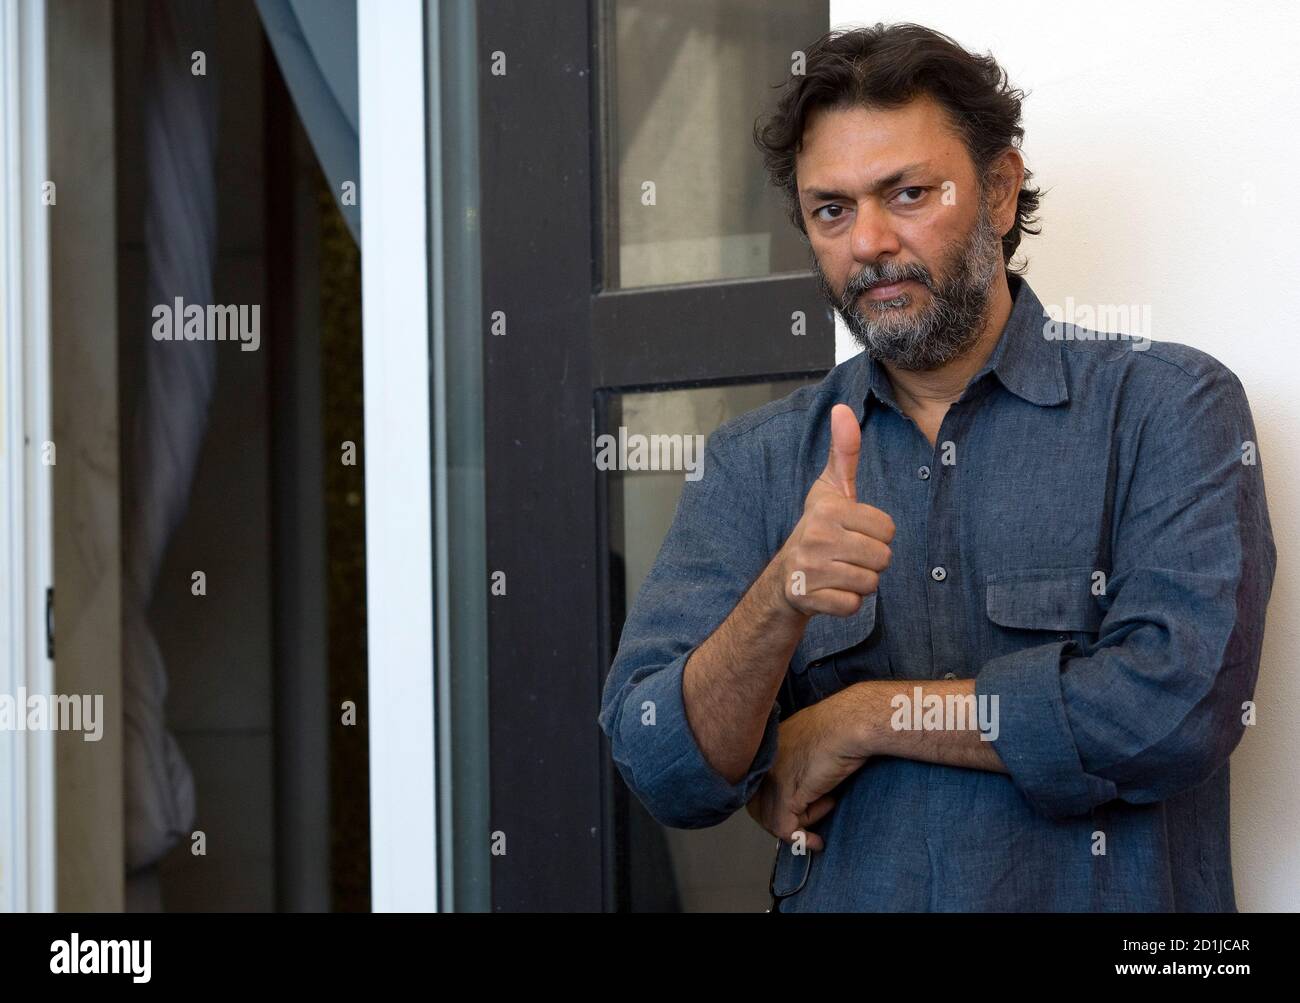 Director Rakeysh Omprakash Mehra attends the ''Delhi-6' ' photocall at the Palazzo del Casino during the 66th Venice Film Festival September 9, 2009.  REUTERS/Alessandro Bianchi   (ITALY ENTERTAINMENT) Stock Photo